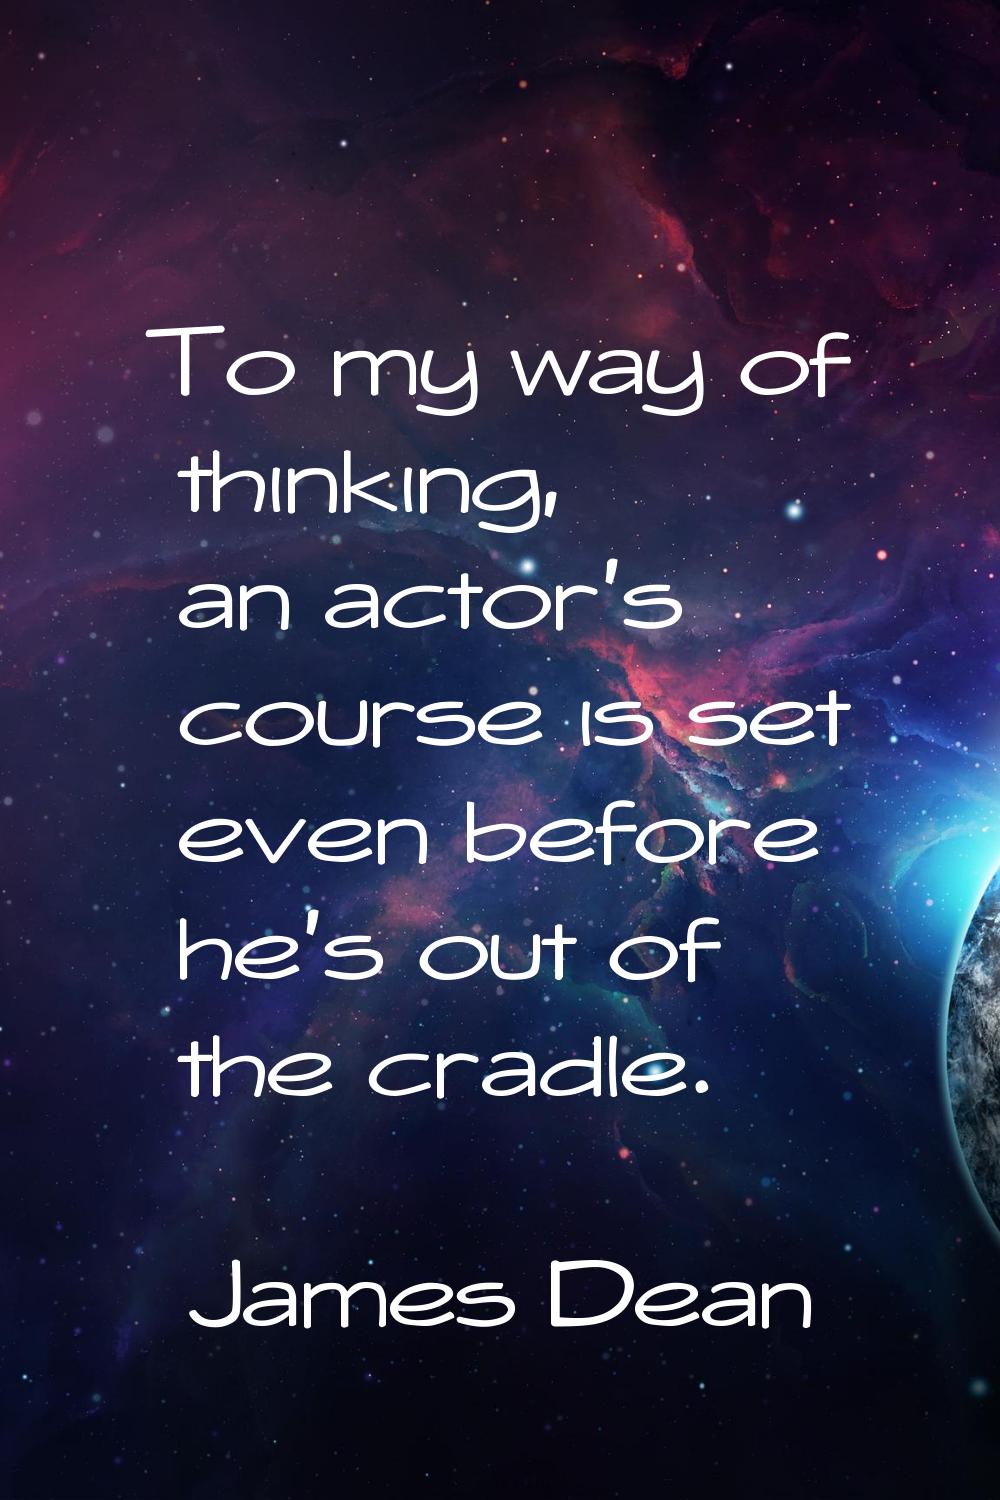 To my way of thinking, an actor's course is set even before he's out of the cradle.